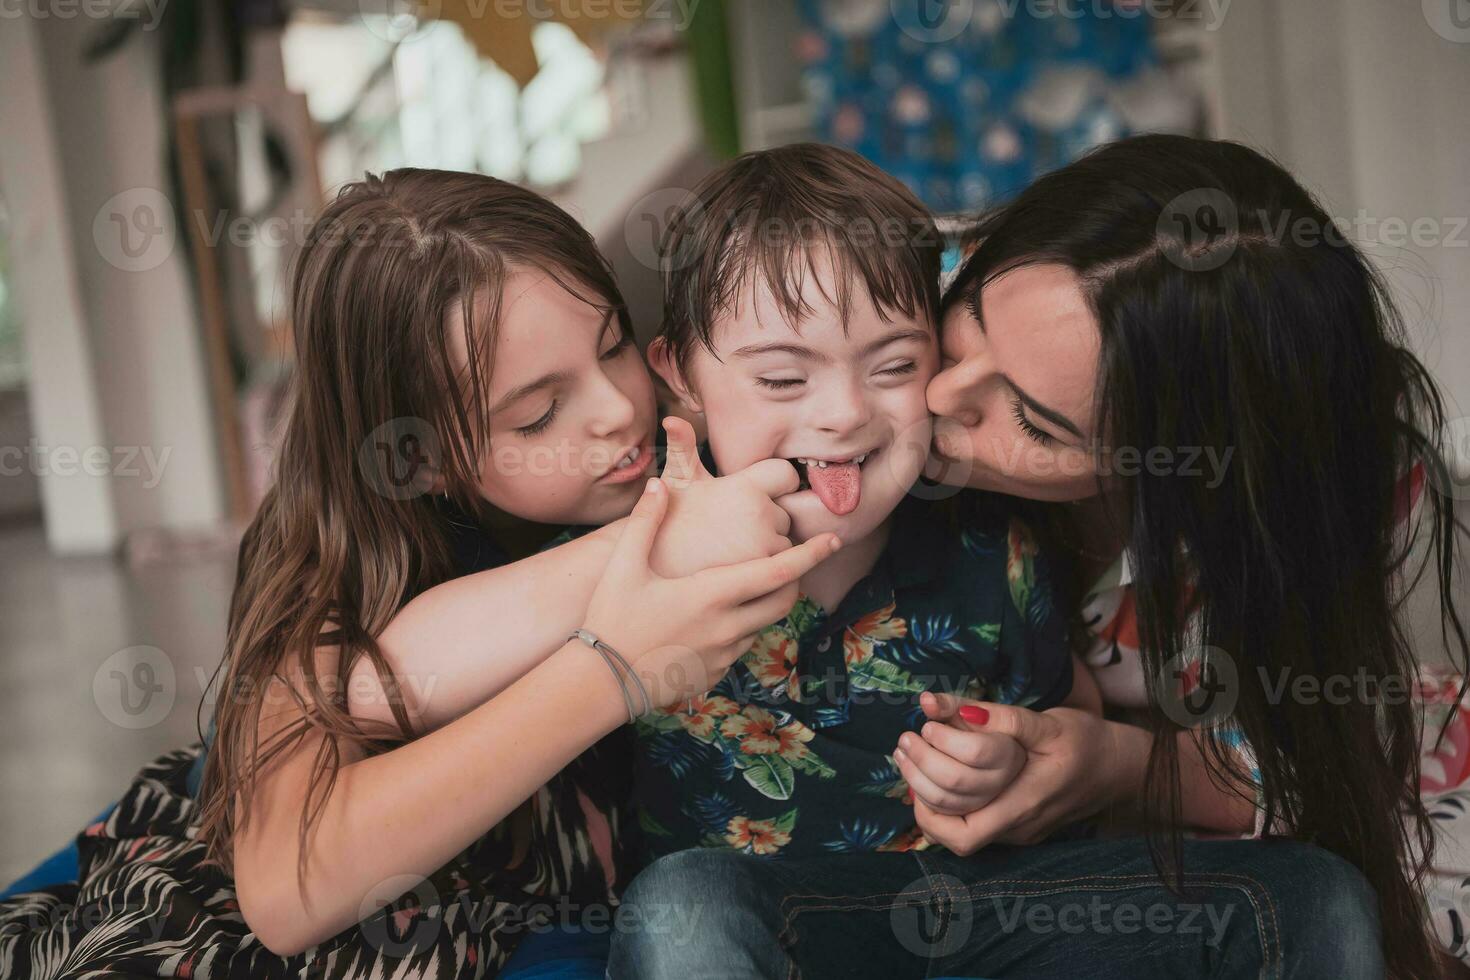 A girl and a woman hug a child with down syndrome in a modern preschool institution photo